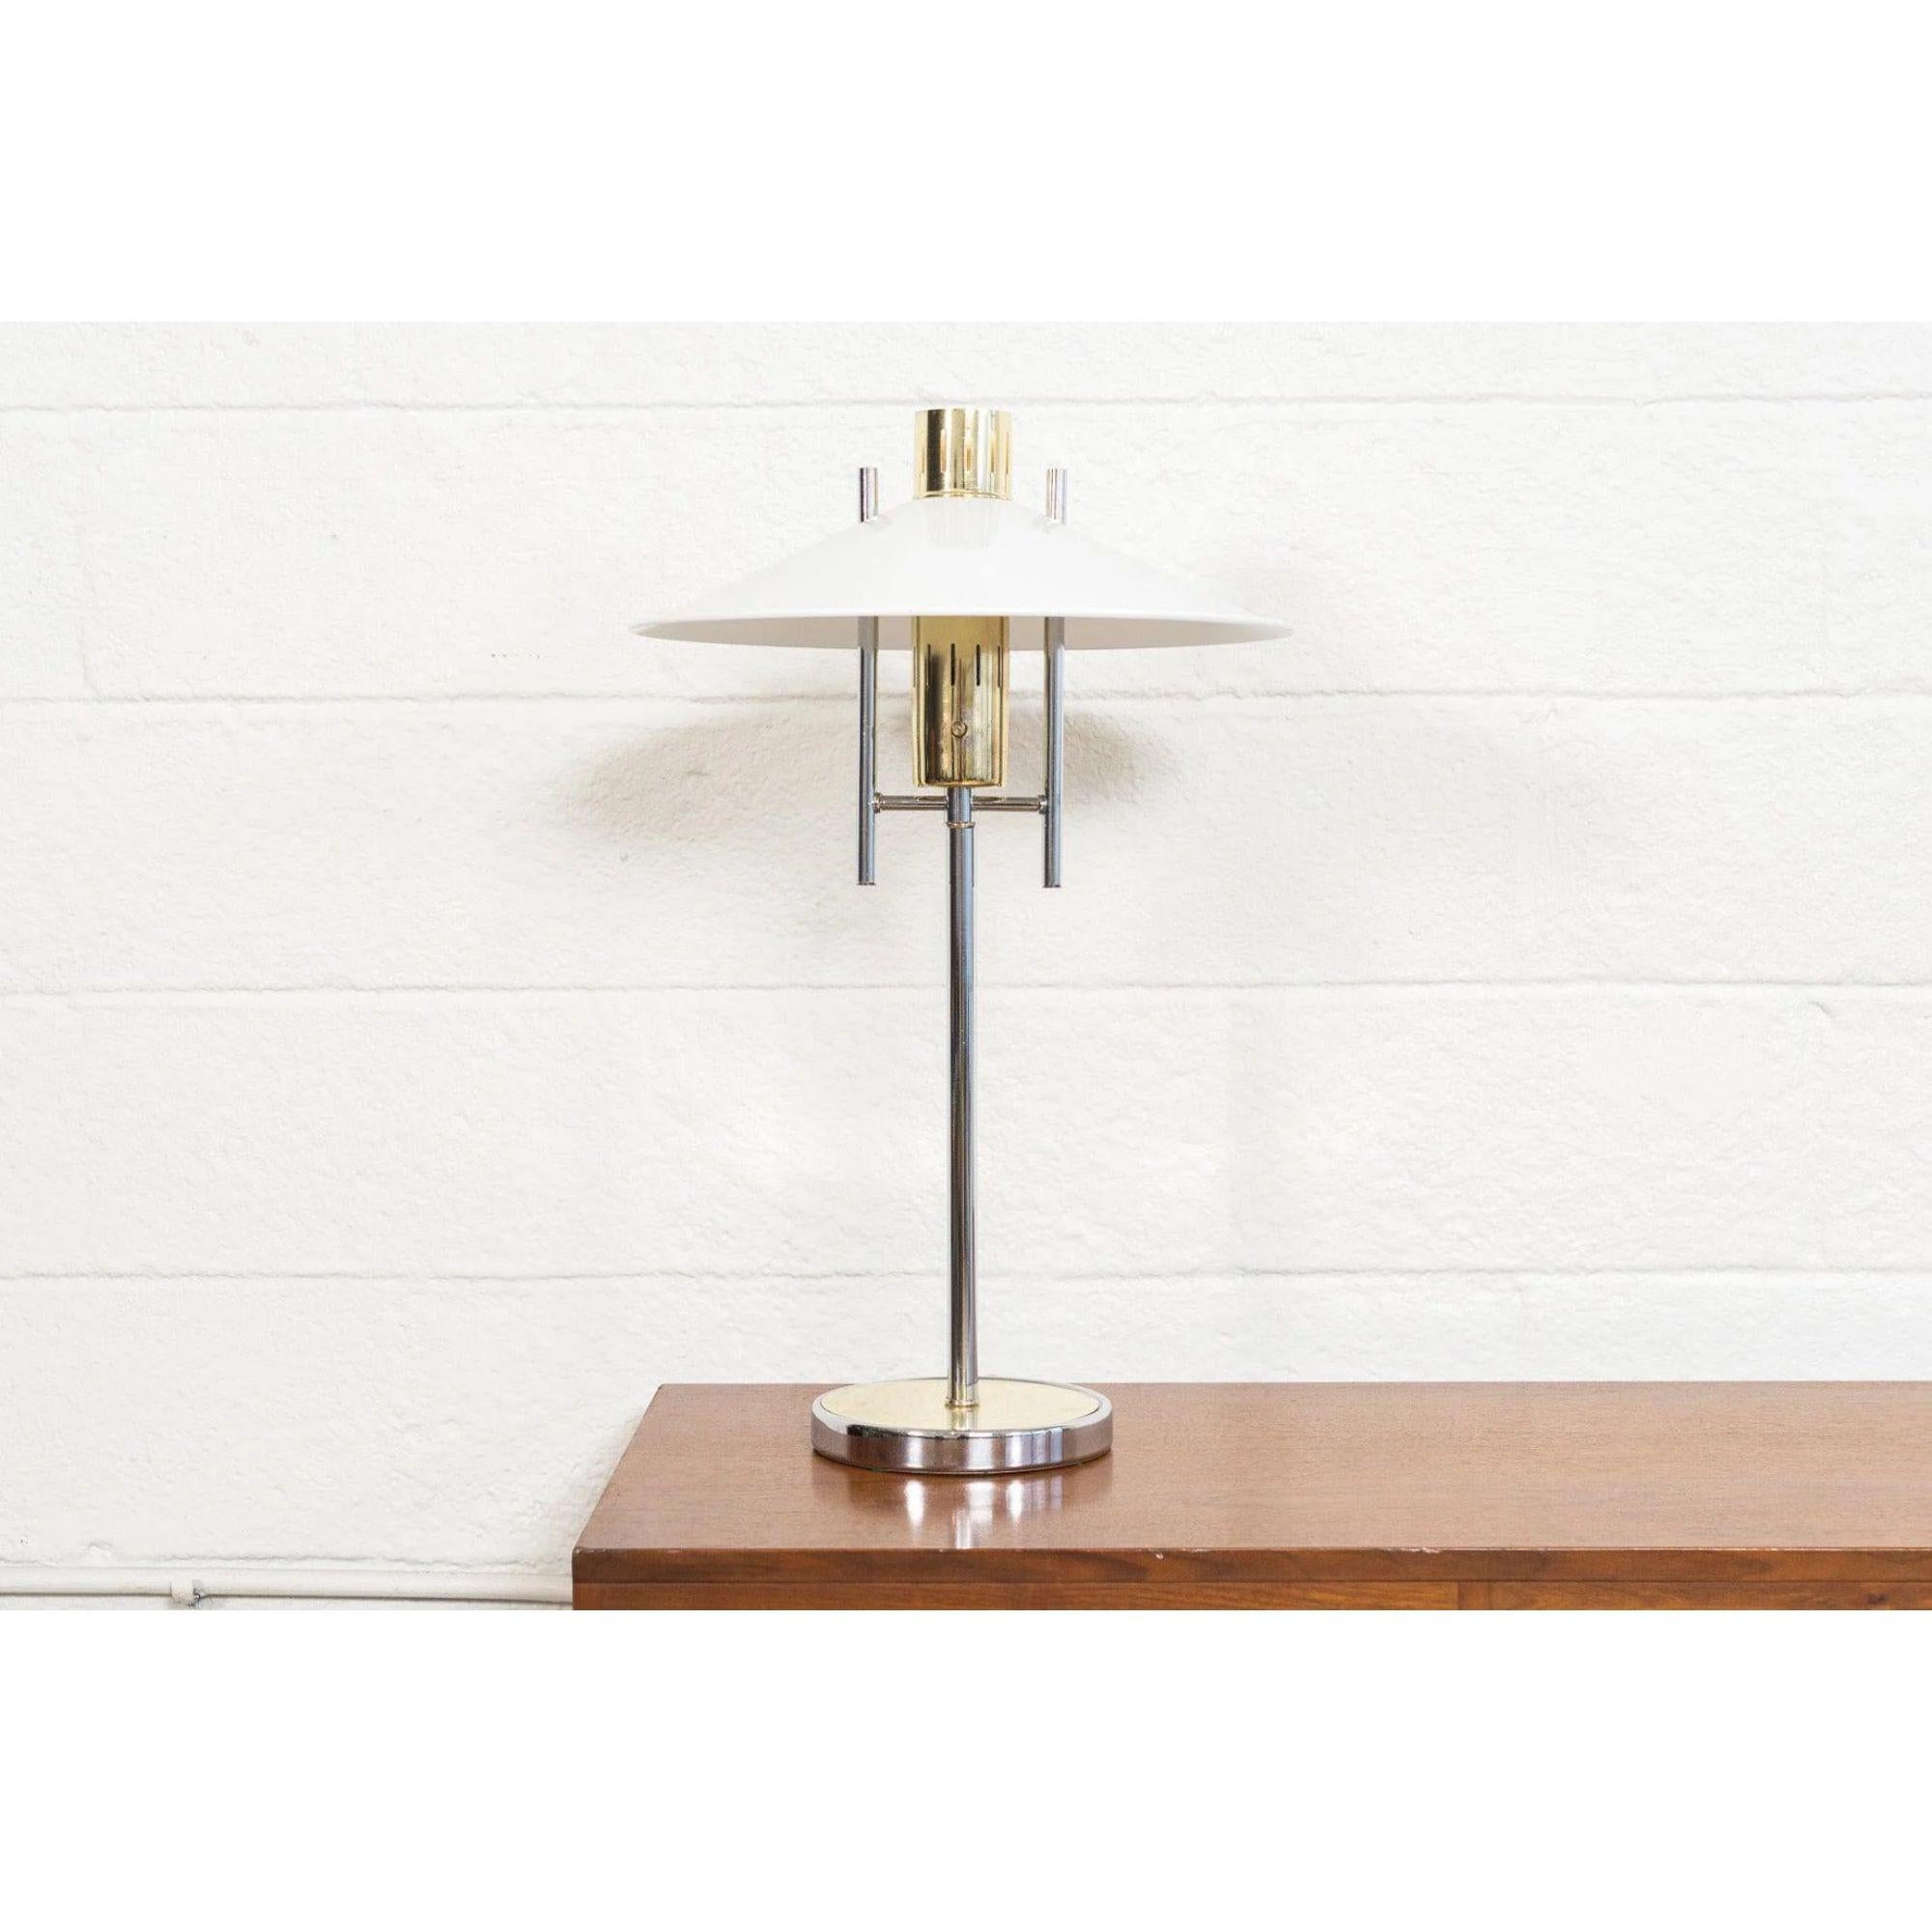 This unique vintage Mid-Century Modern table lamp is circa 1970. The clean, modernist design features a tubular polished chrome stem with brass accented at center and base and a white metal triangular shade. Lamp has three-way switch.

Additional